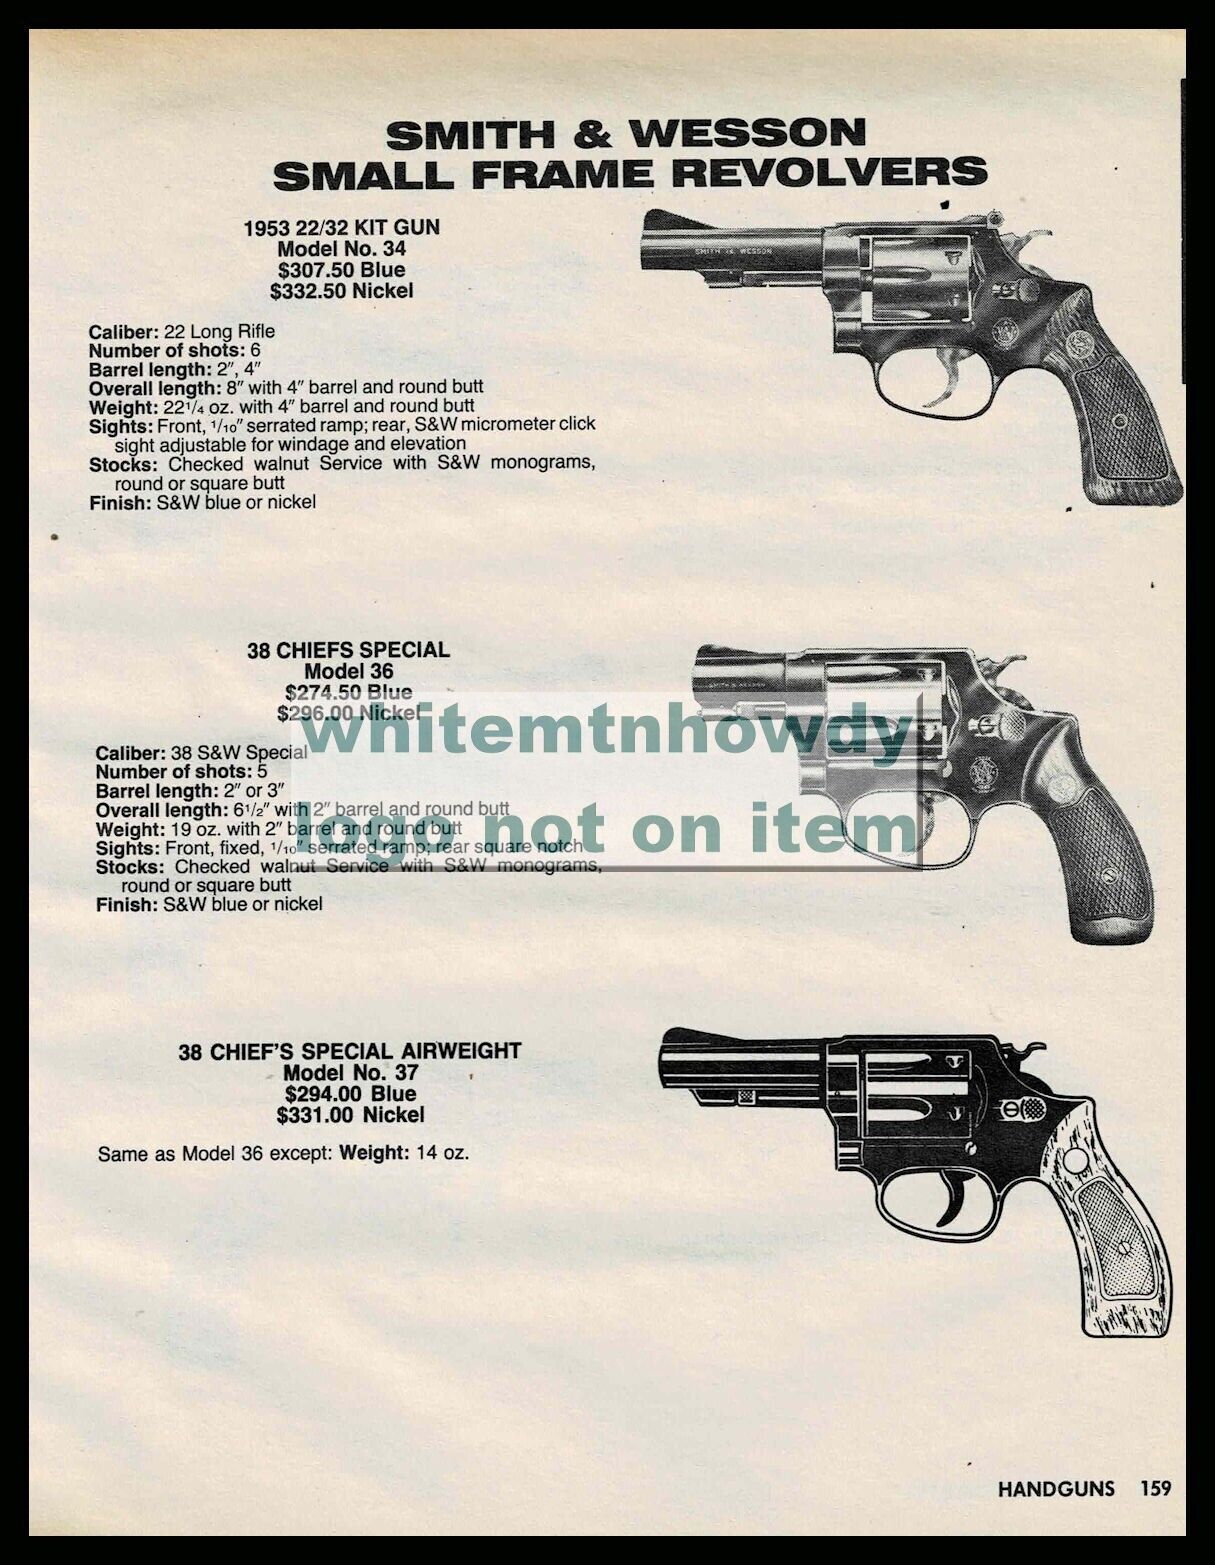 1987 SMITH & WESSON Model 34, 36, 37 Revolver PRINT AD with specs